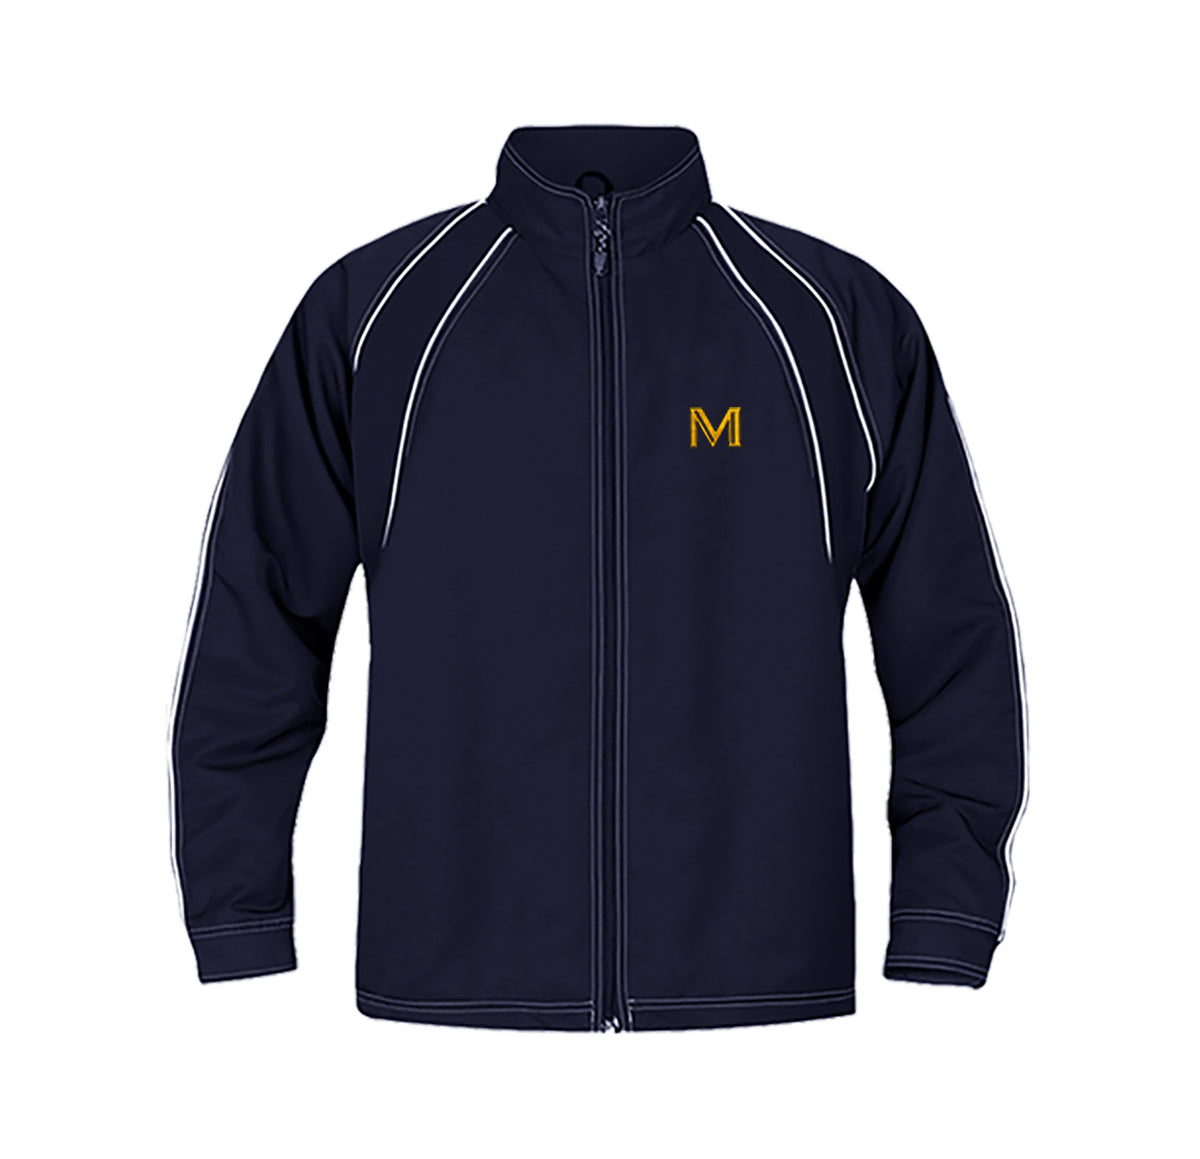 MULGRAVE TRACK JACKET WITH NAME EMBROIDERY, TWILL, ADULT *FINAL SALE*